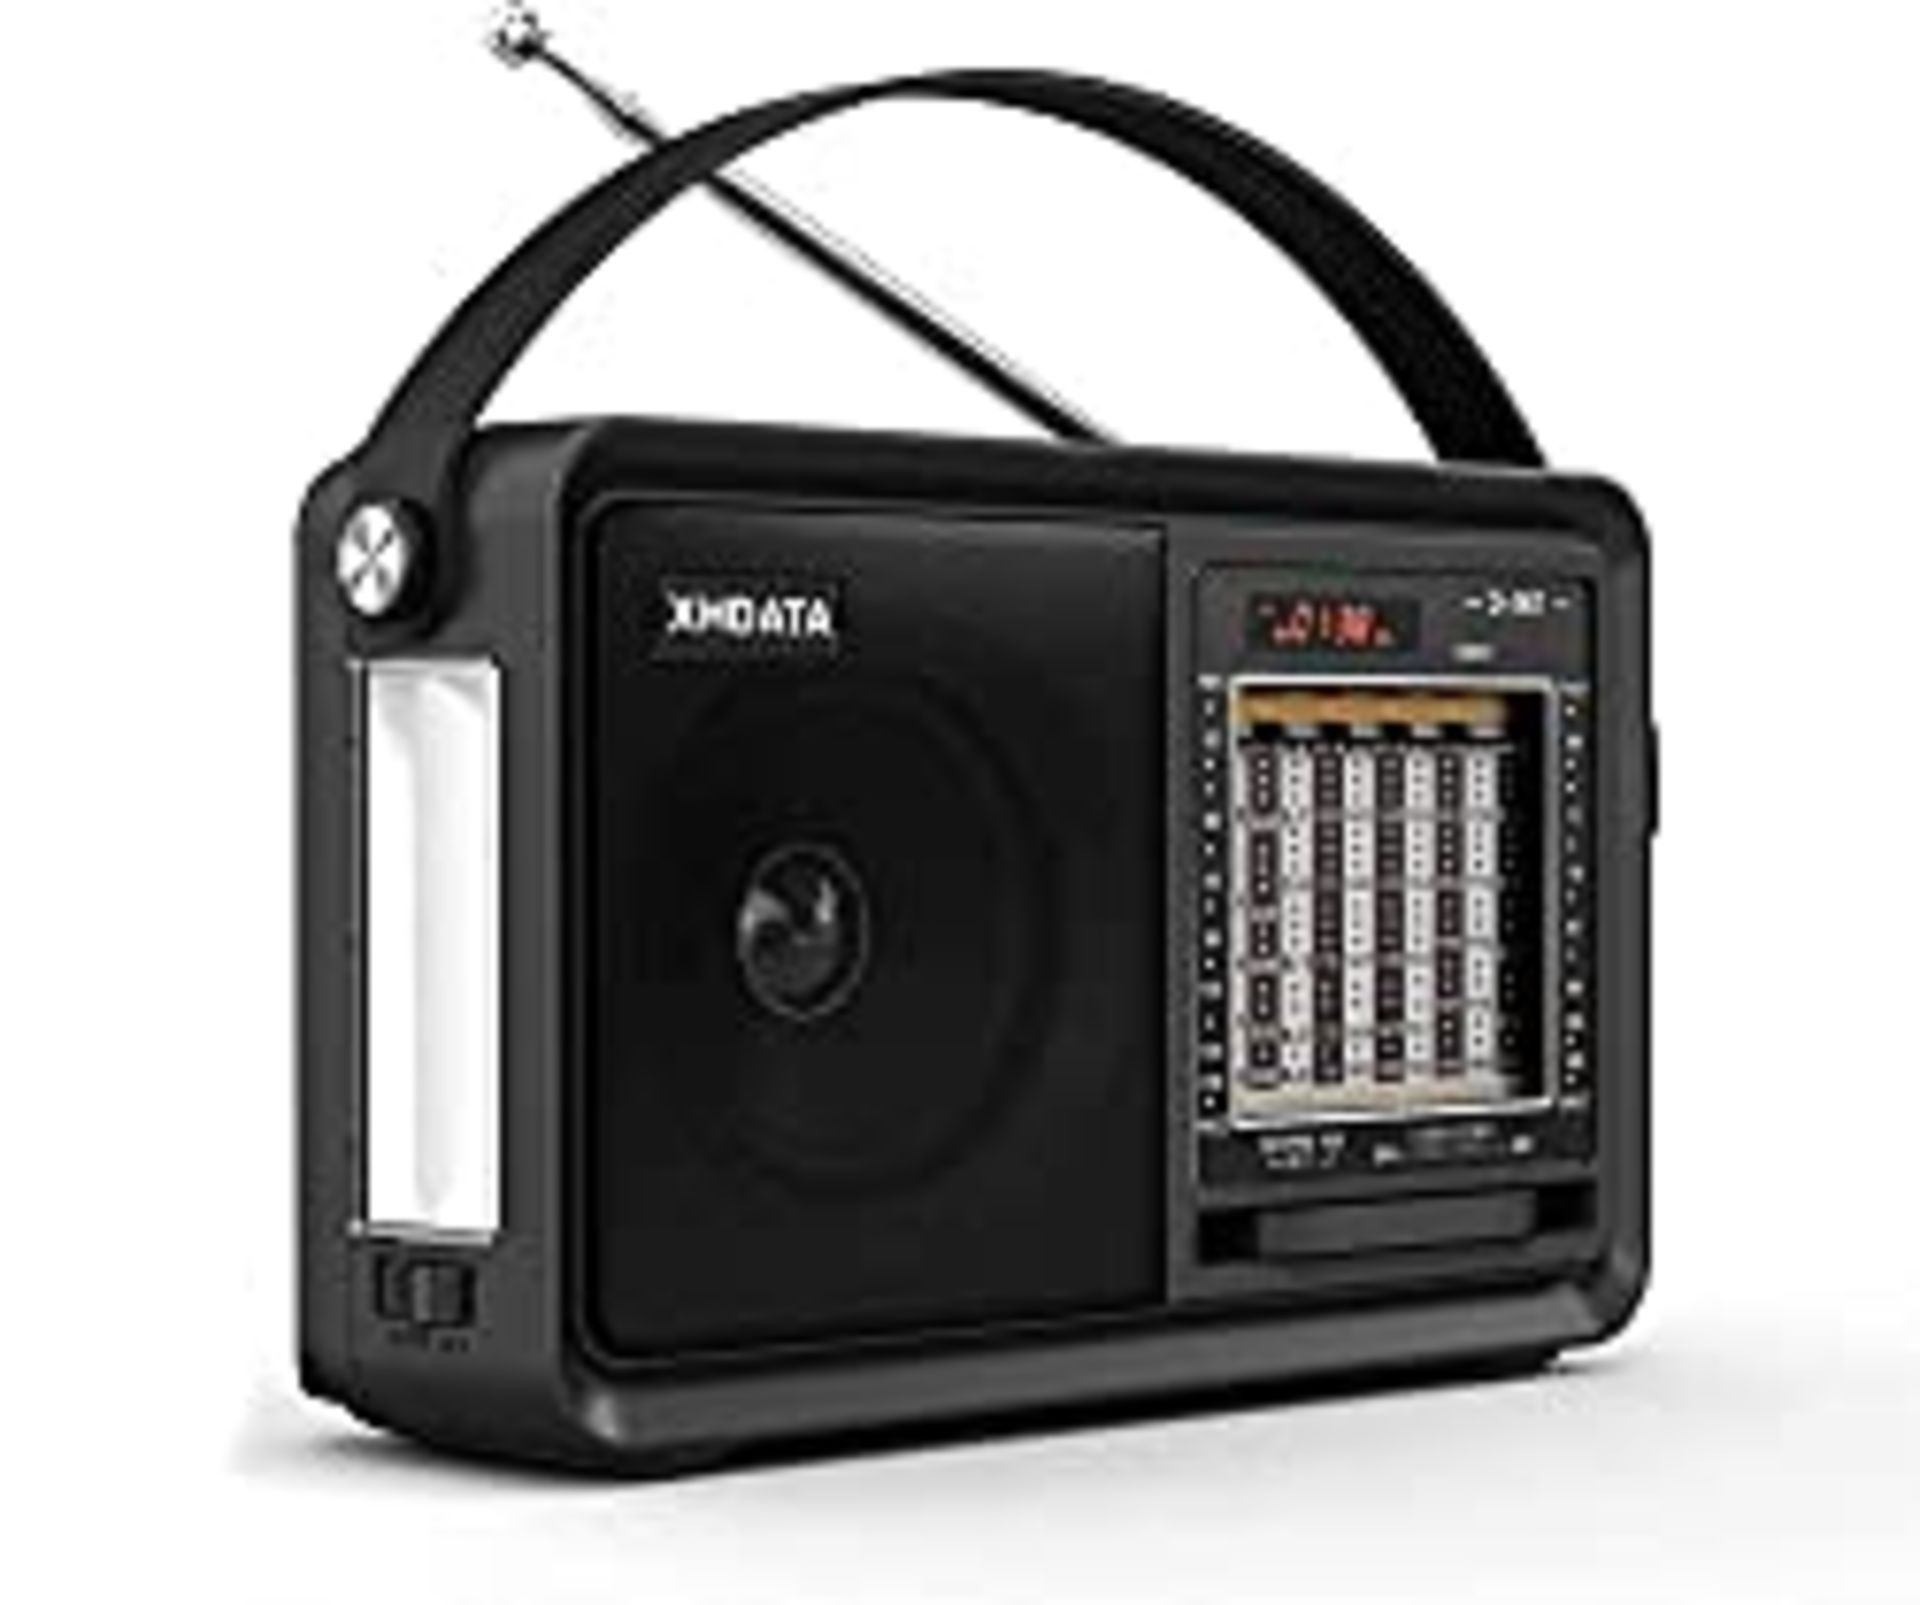 RRP £27.37 XHDATA D901 Portable Battery Radio with Bluetooth Speaker